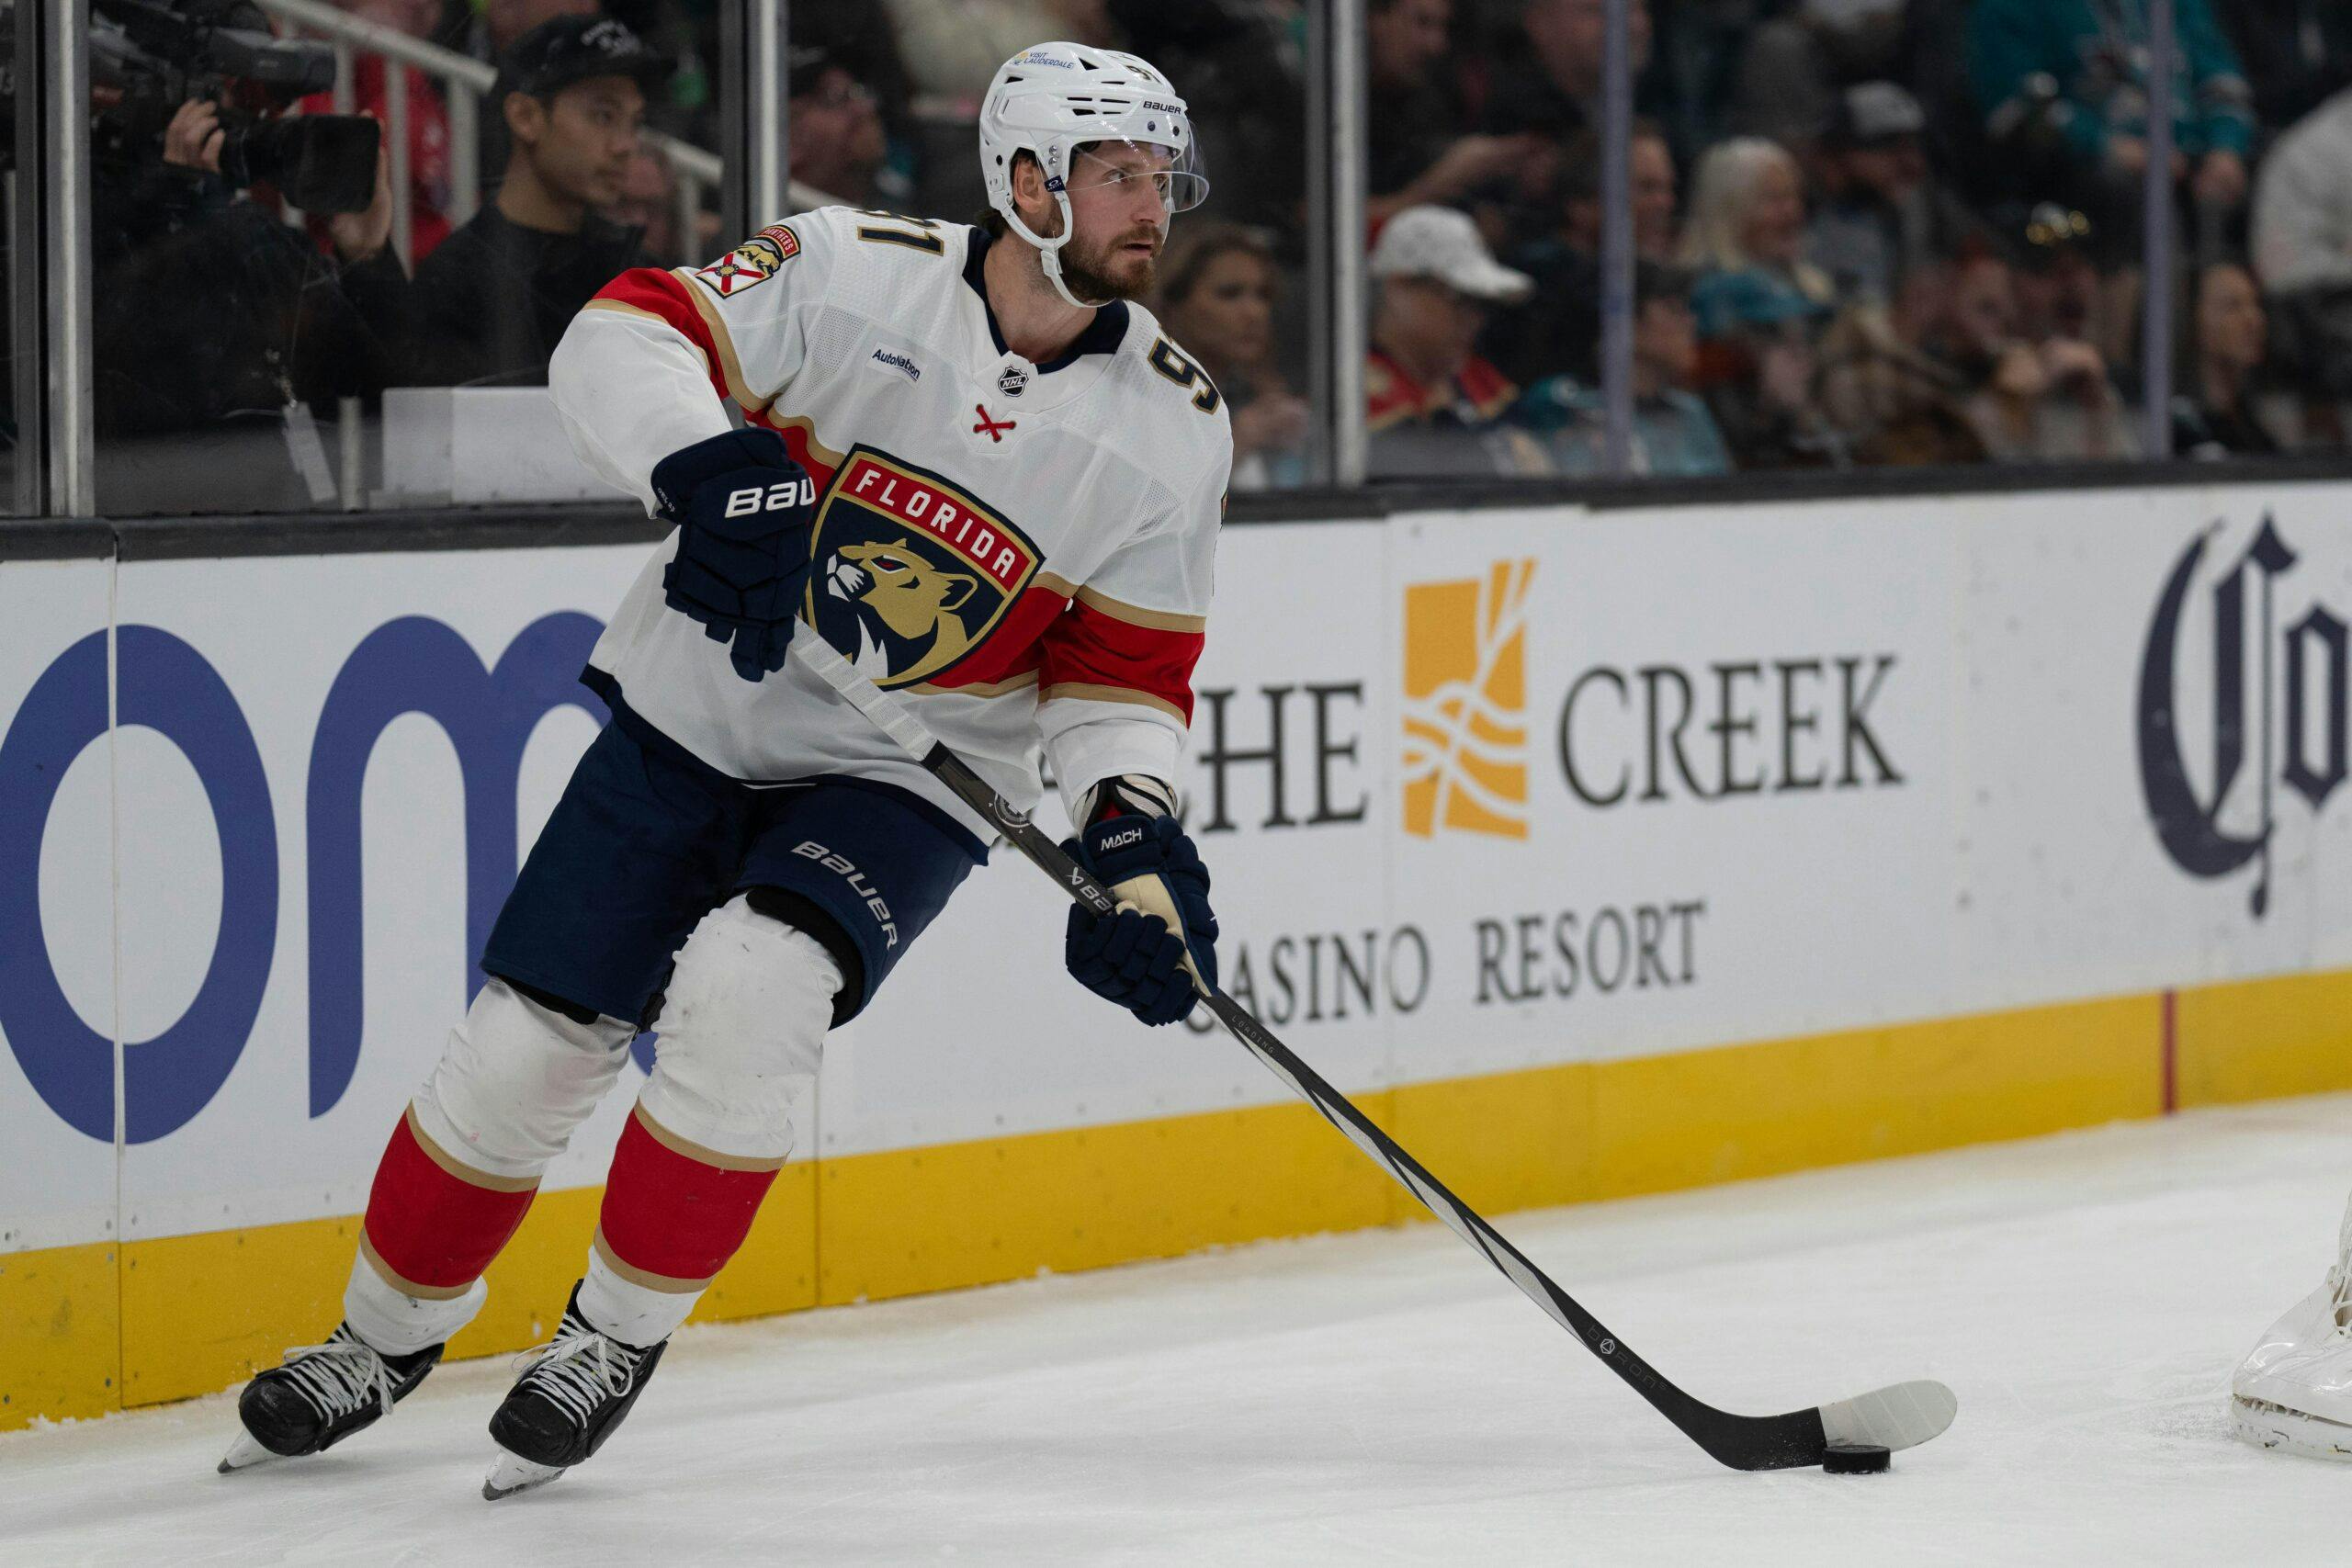 Oliver Ekman-Larsson’s resurgence has been so valuable for the Florida Panthers